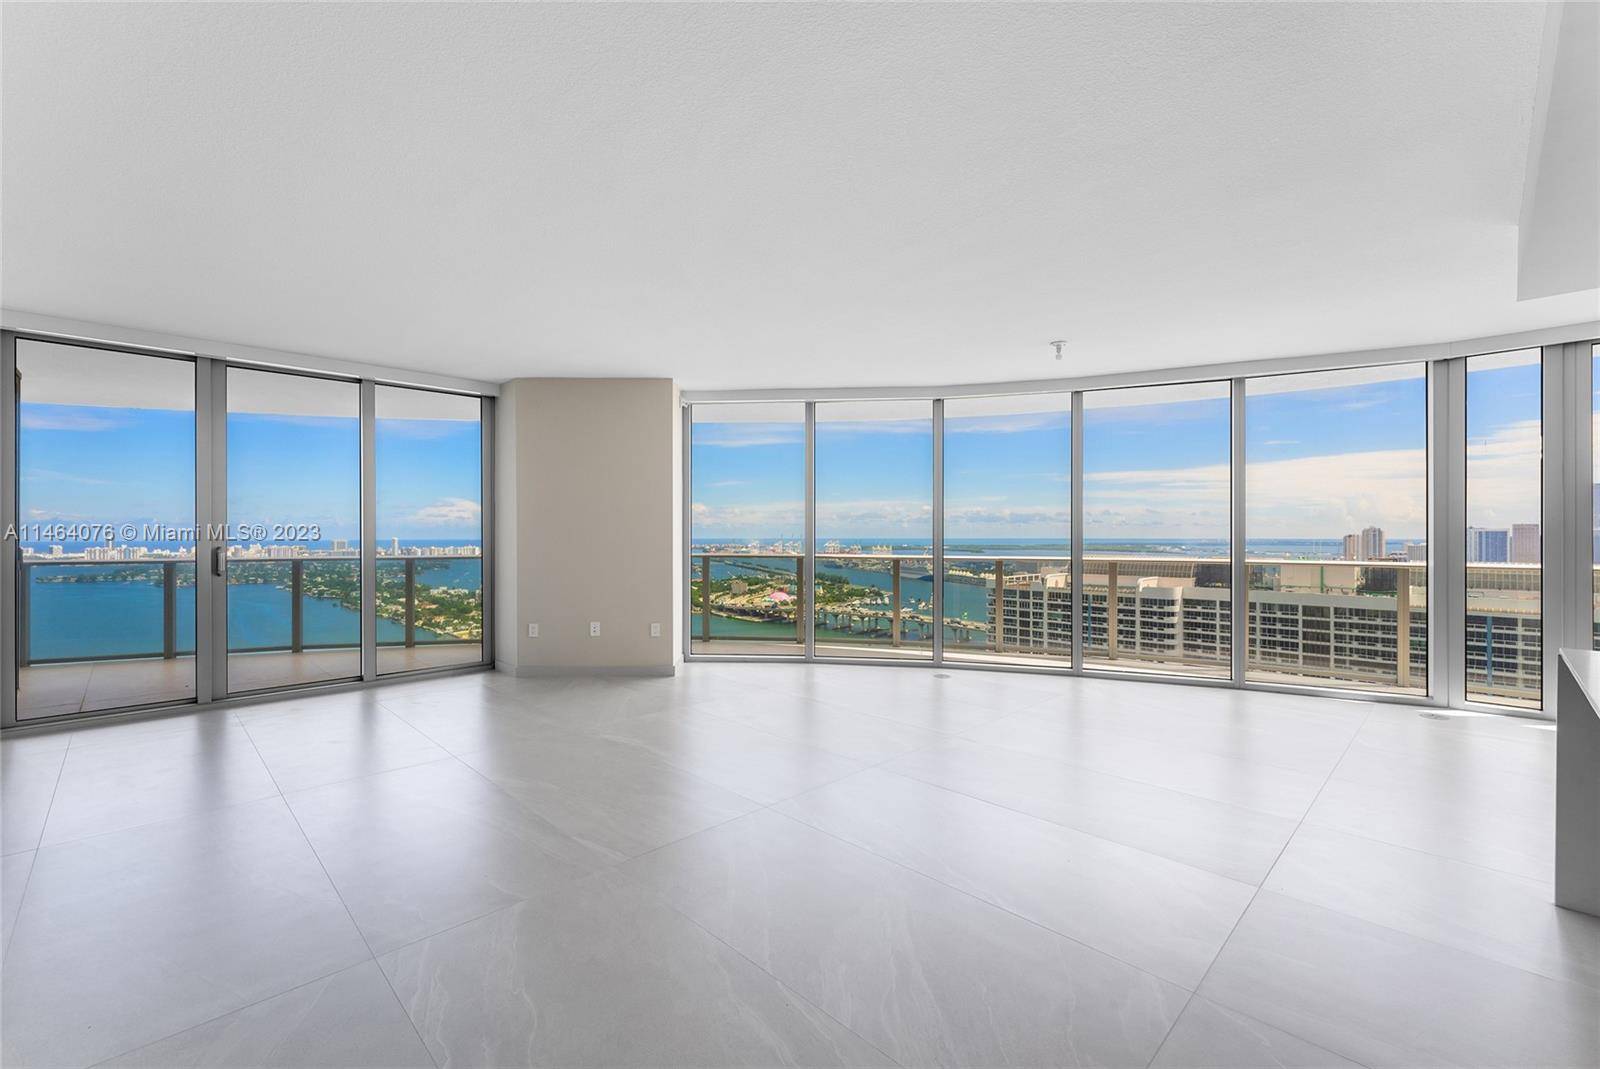 This fabulous 3BR 4BA Southeast corner unit on the 41st floor at Aria On The Bay offers a full wrap around terrace and spectacular panoramic views over the open bay, ...